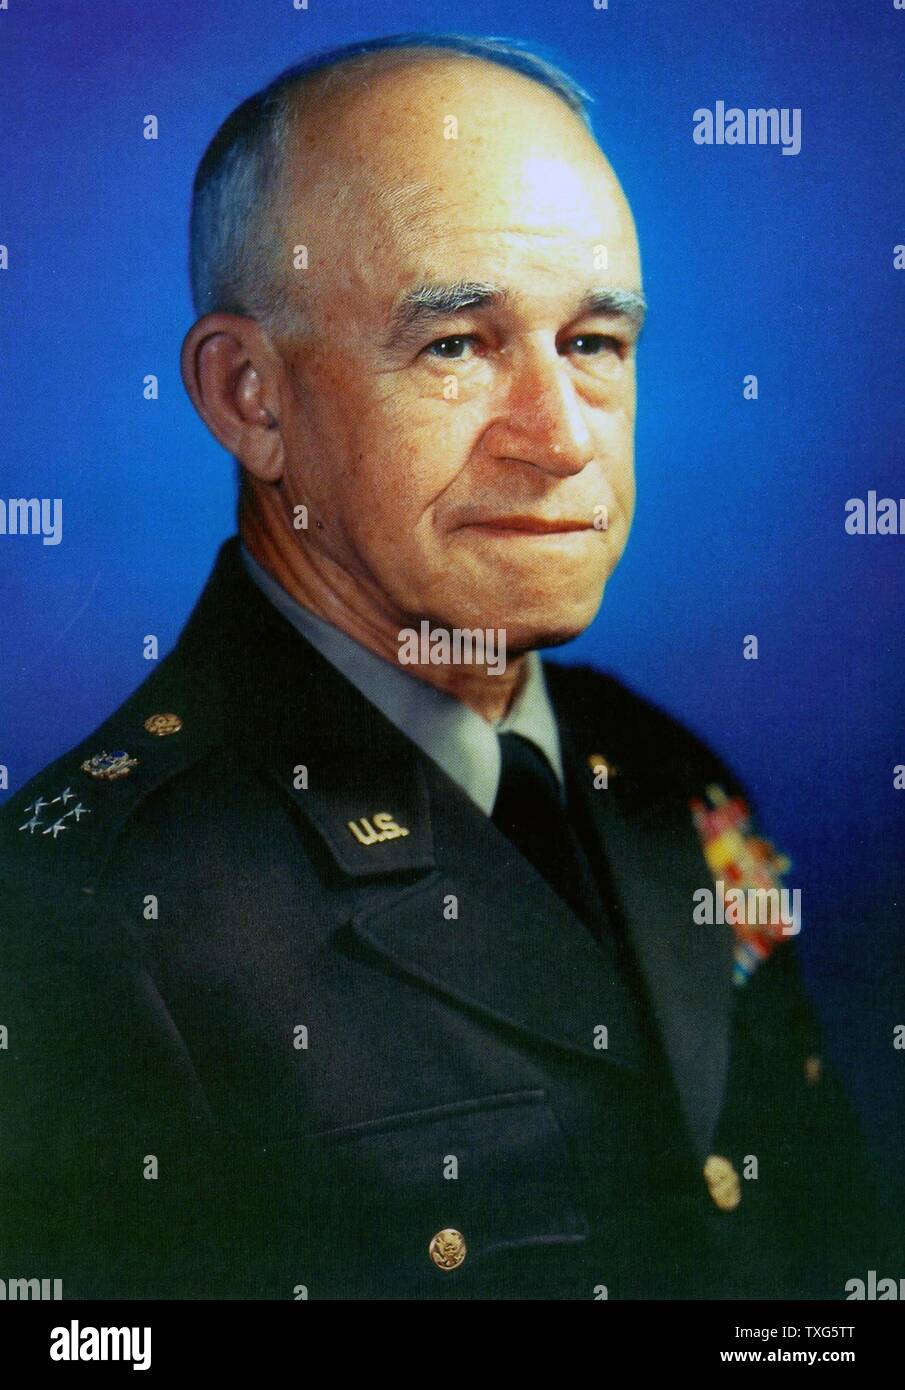 Omar Nelson Bradley, American general, U.S. Army field commander in both North Africa and Europe during the Second World War.  Appointed first Chairman of the Joint Chiefs of Staff by President Truman. Stock Photo